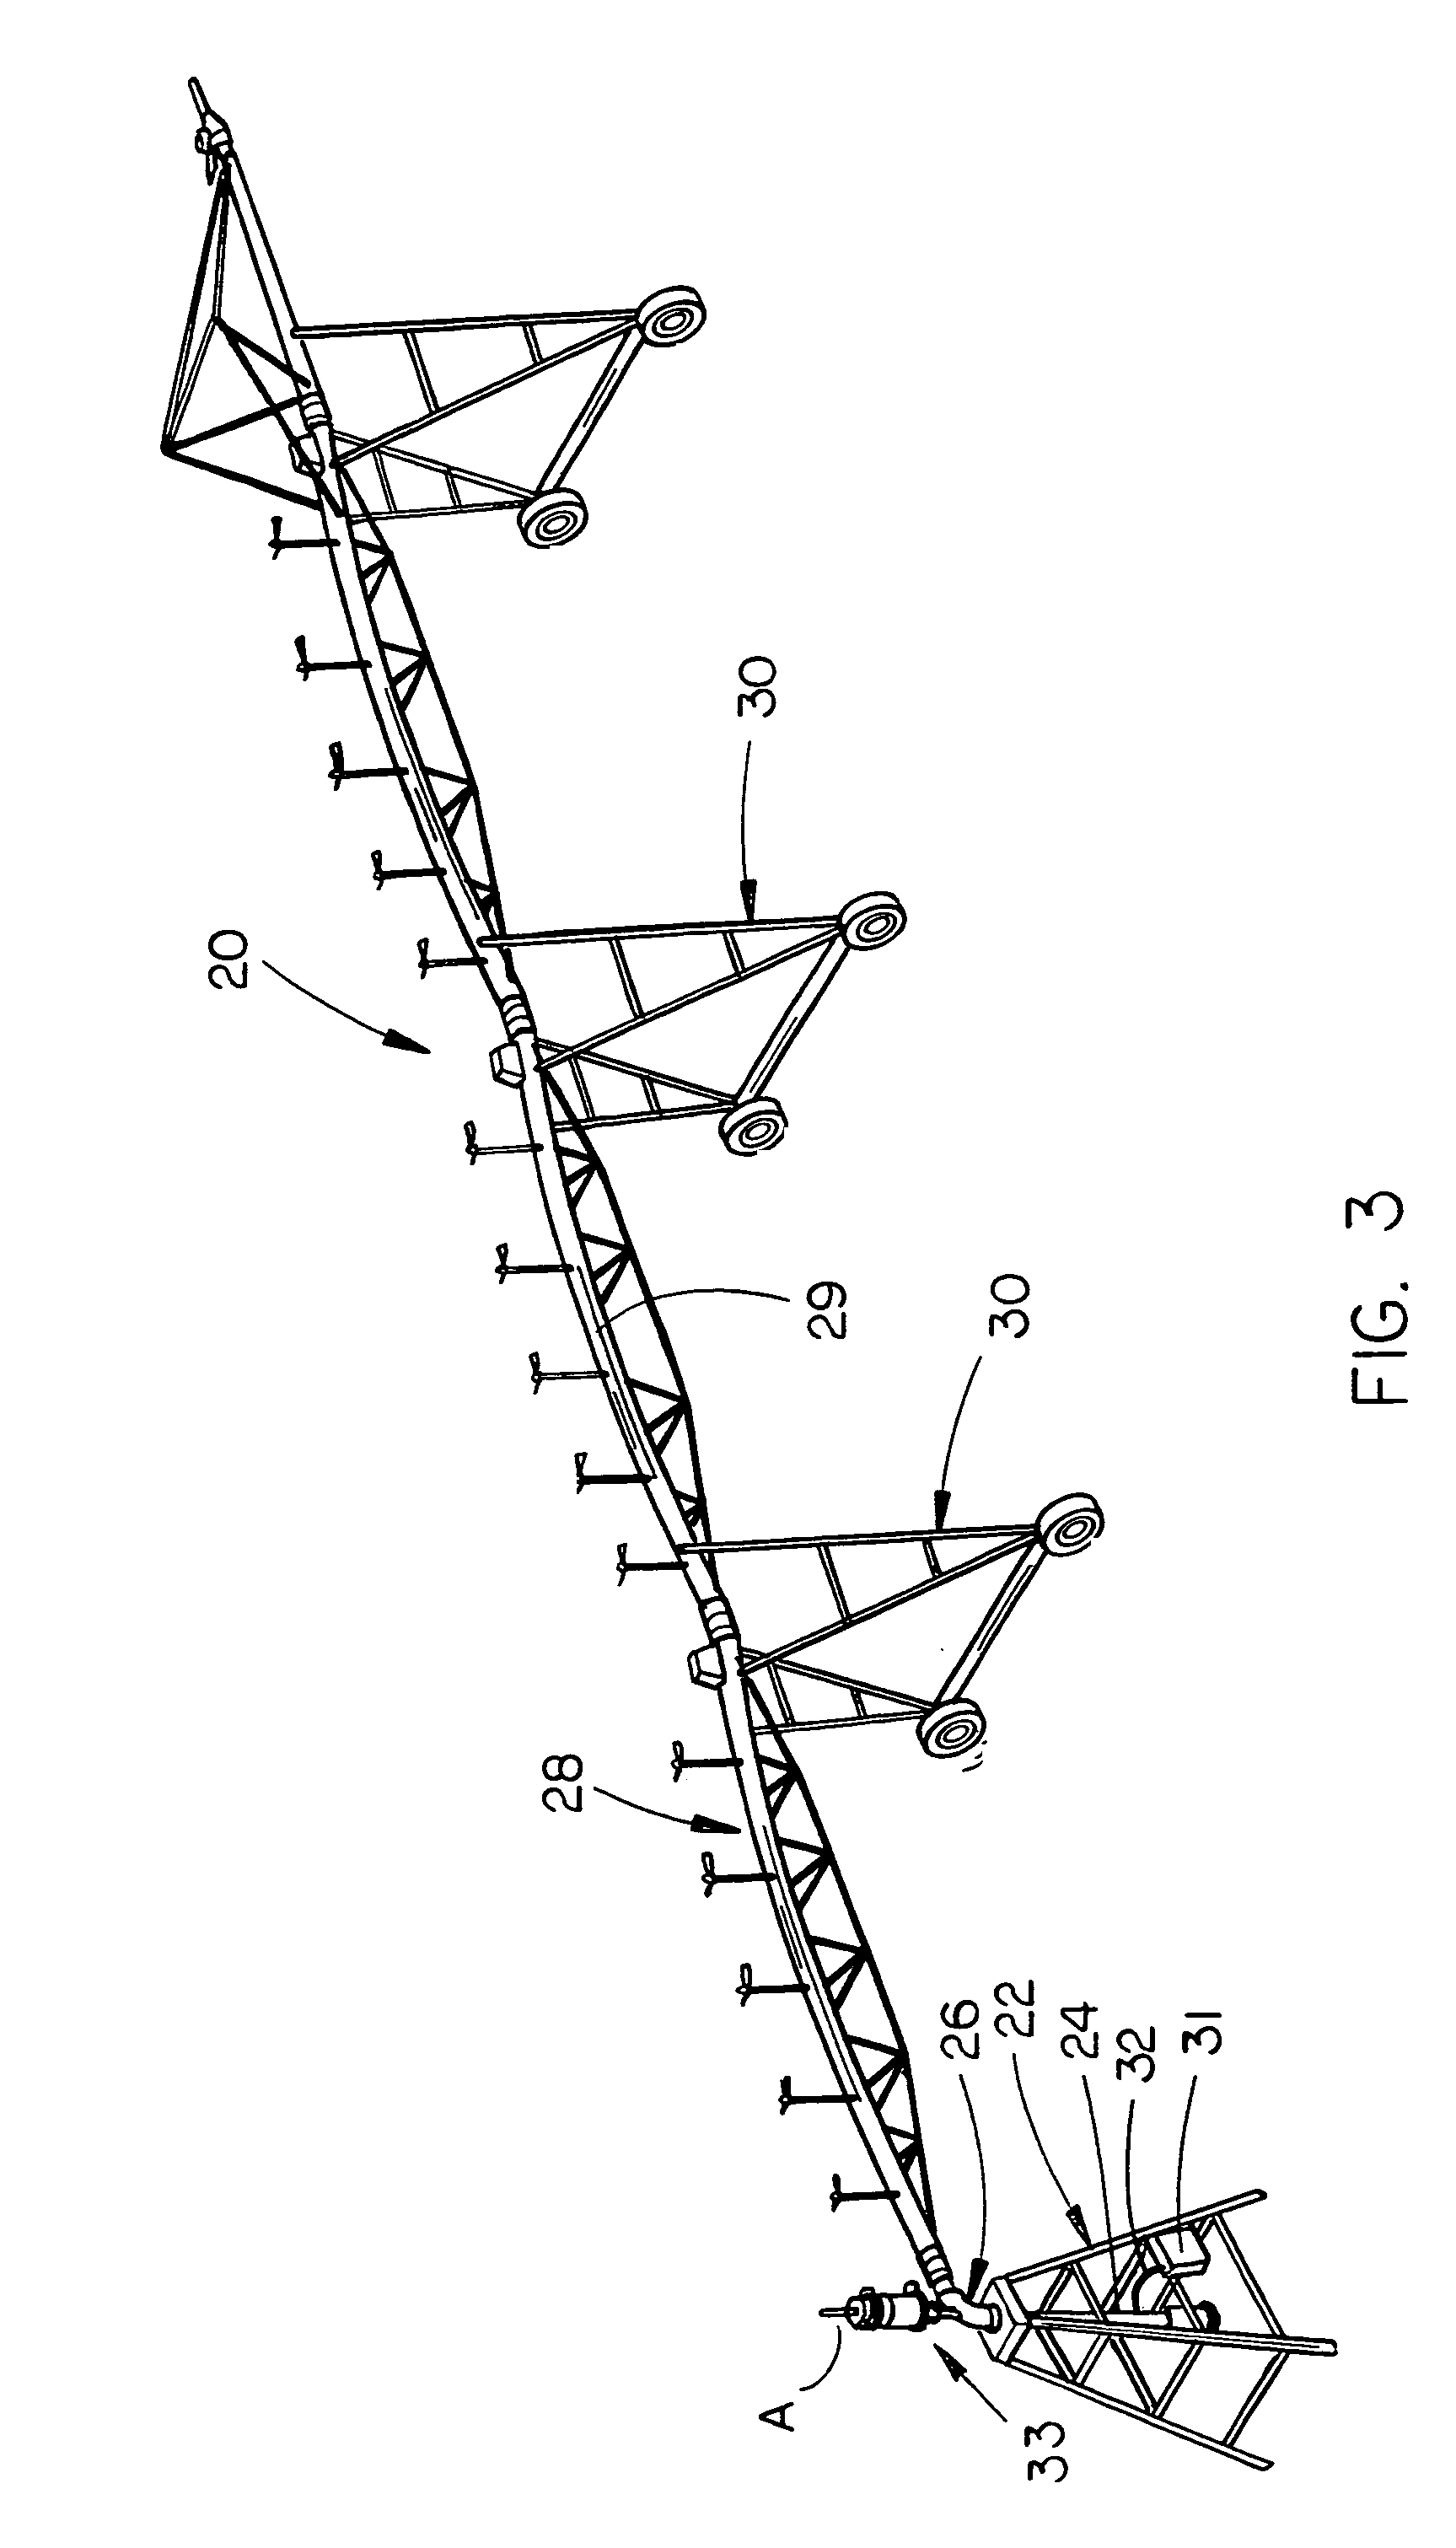 Collector ring for a center pivot irrigation machine